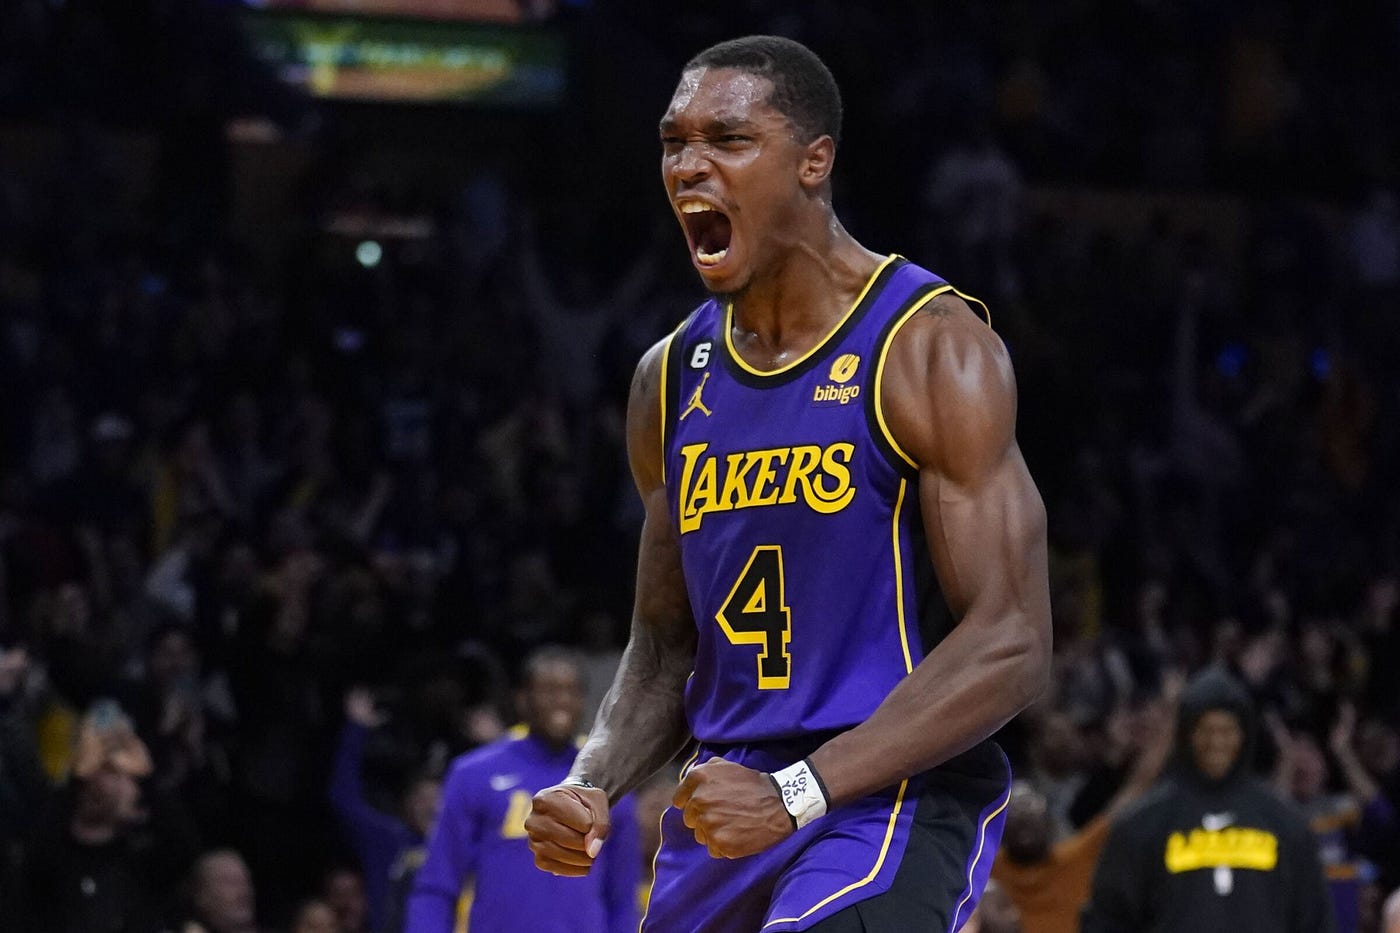 Lakers rally past Warriors 104-101, take 3-1 series lead